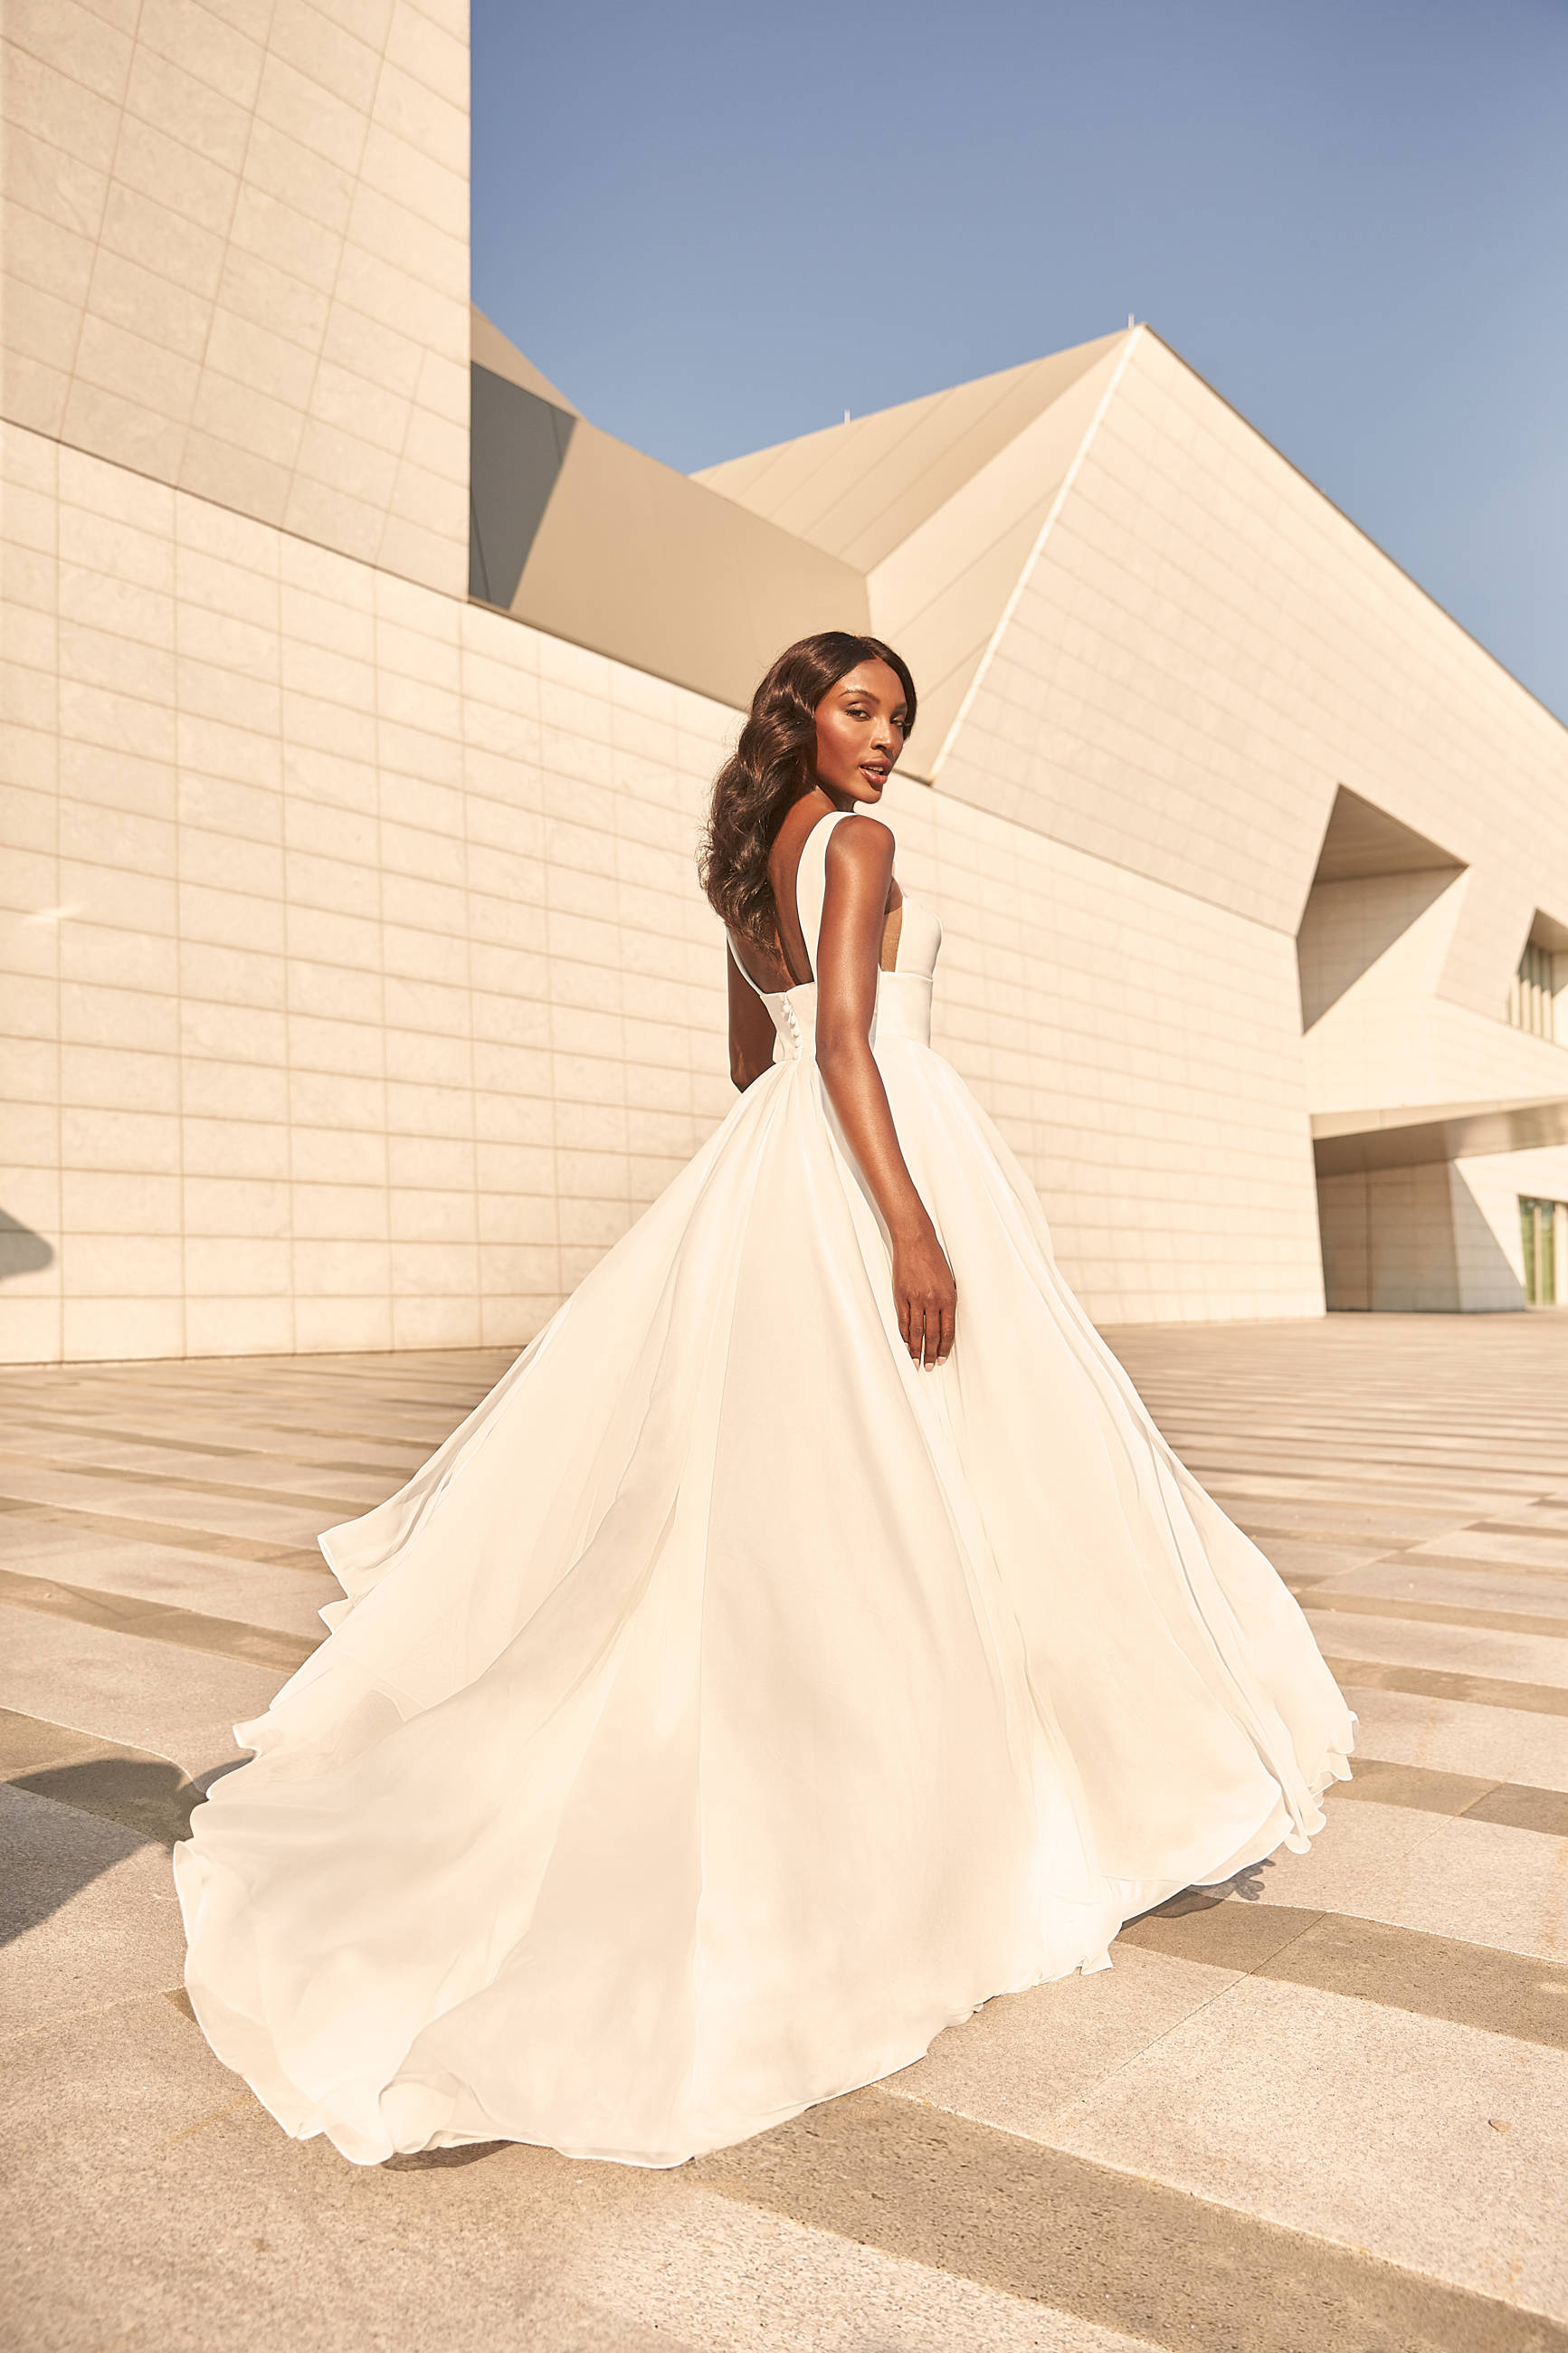 Find Your Dream Wedding Dress With Chantal’s Image